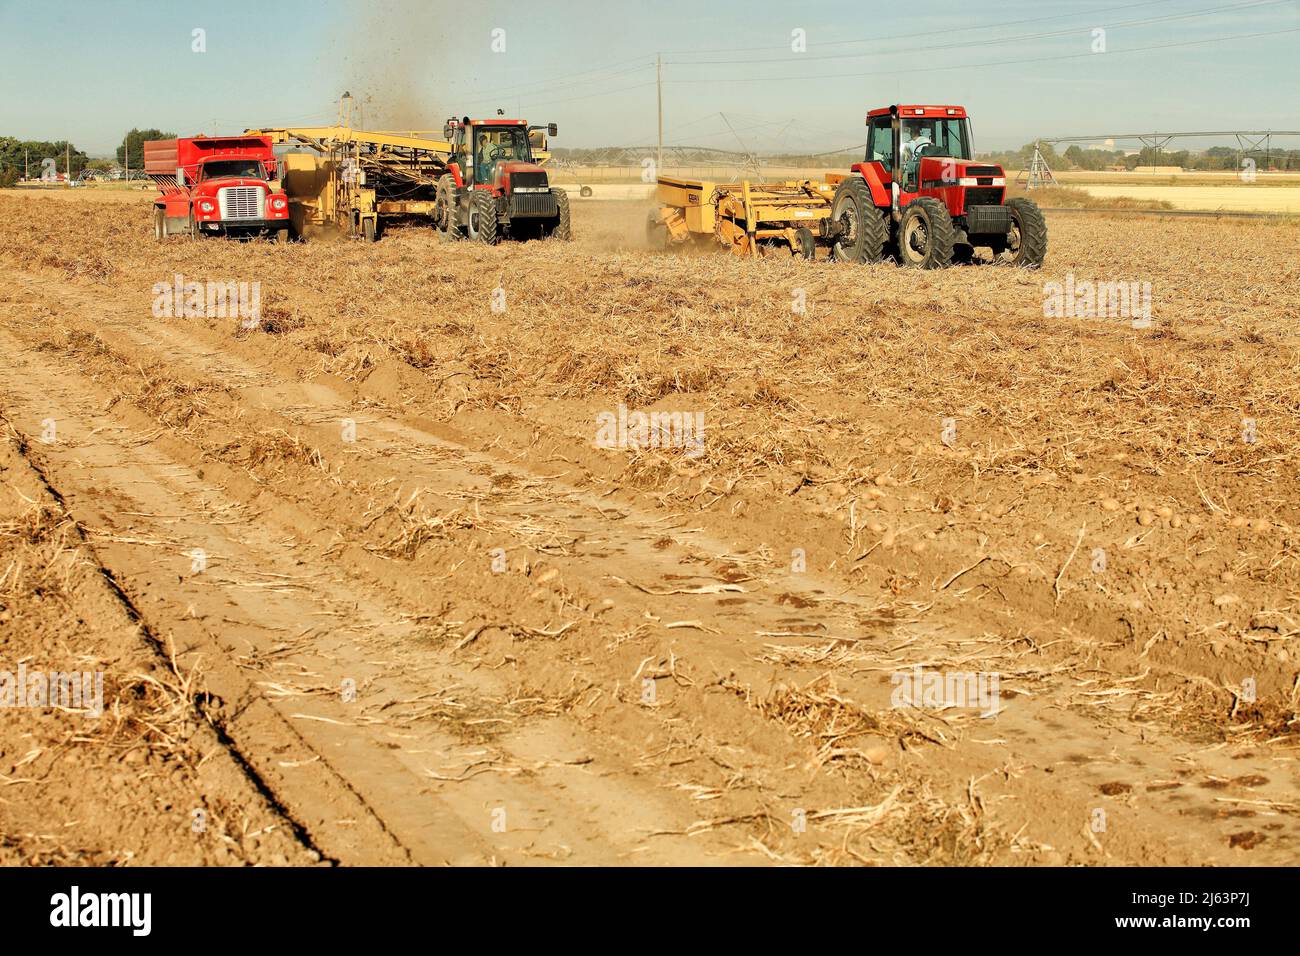 Idaho Falls, Idaho, USA 28 Sept 2011- Farmers and field hands use farm machinery in the field harvesting russett potatoes.  The potatoes are dug by a Stock Photo